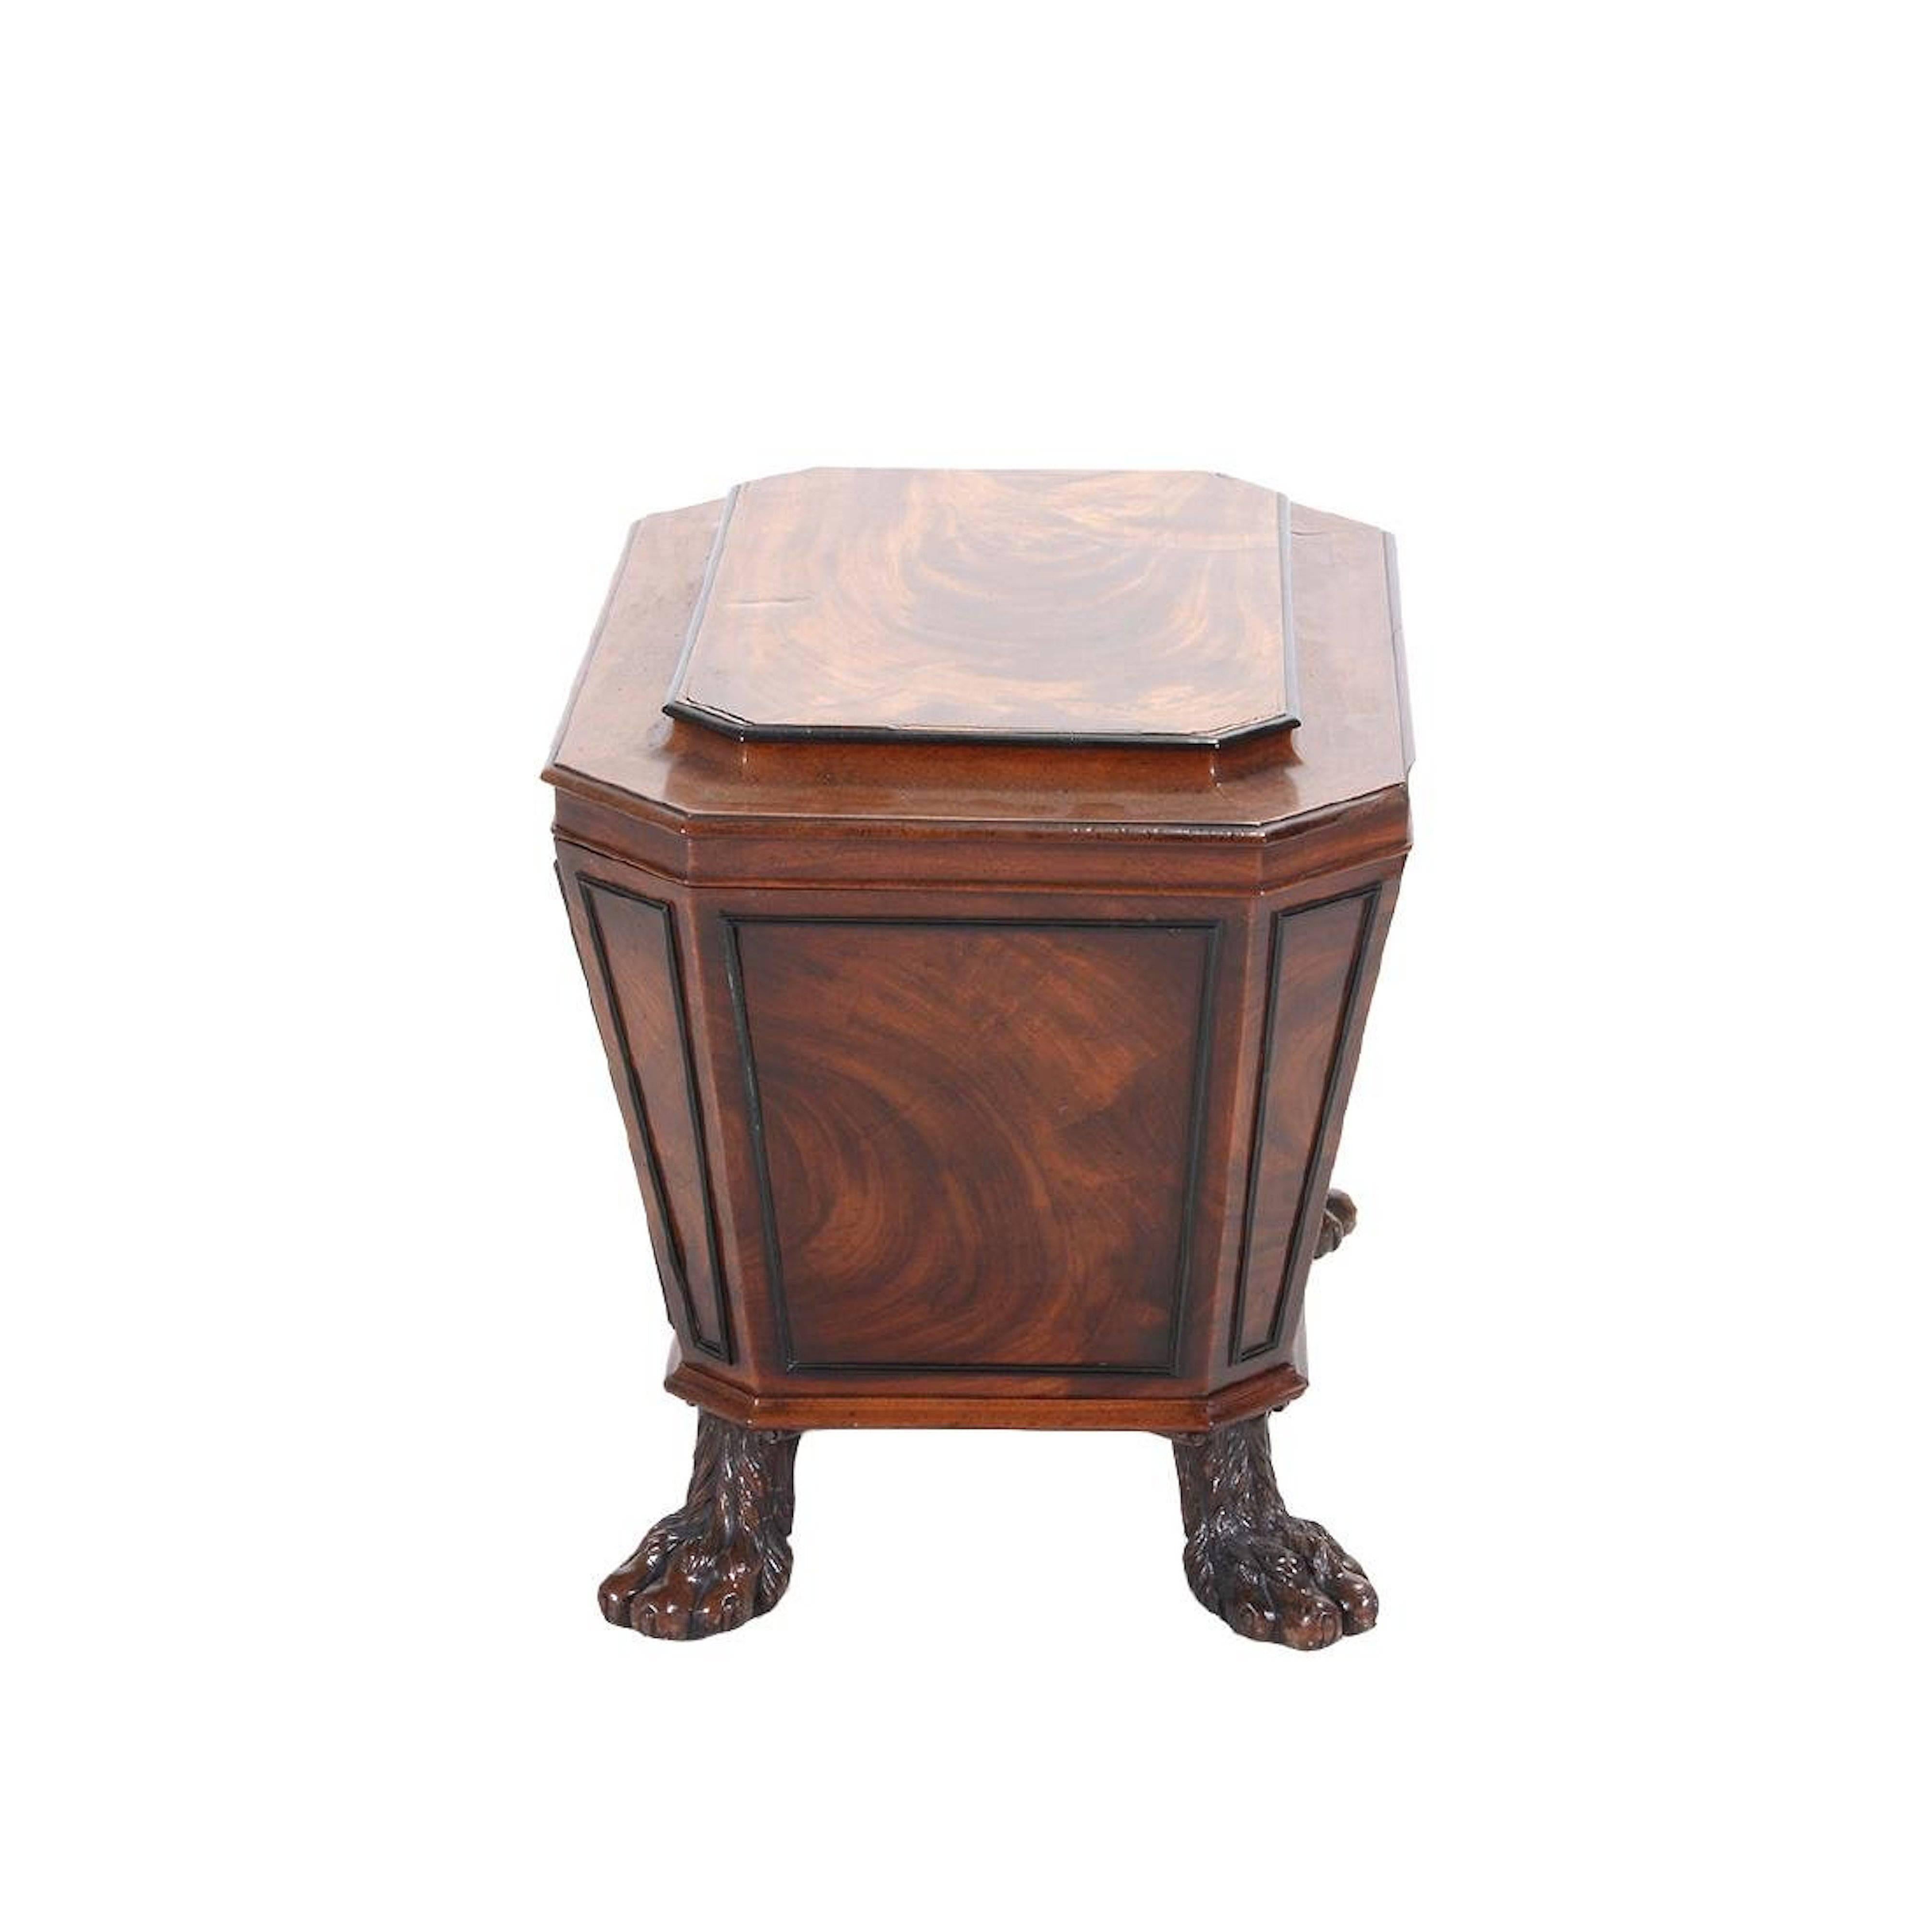 A fine and elegant circa 1810 English Regency period cellarette or wine cooler in the style of neoclassical designer Thomas Hope; the solid mahogany case of sarcophagus form having raised plinth form lid with canted corners above a conforming